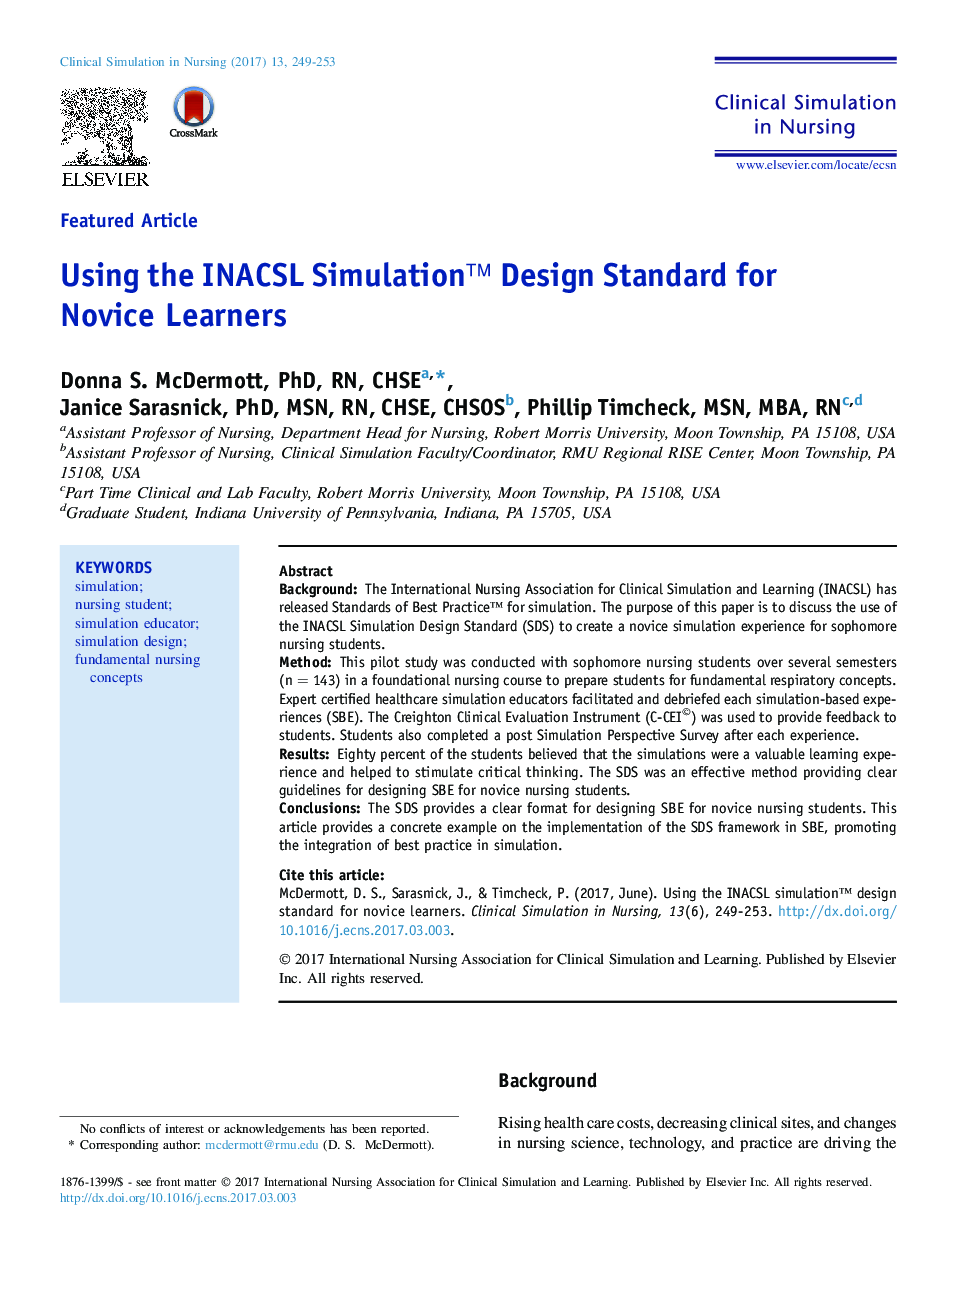 Using the INACSL Simulationâ¢ Design Standard for Novice Learners